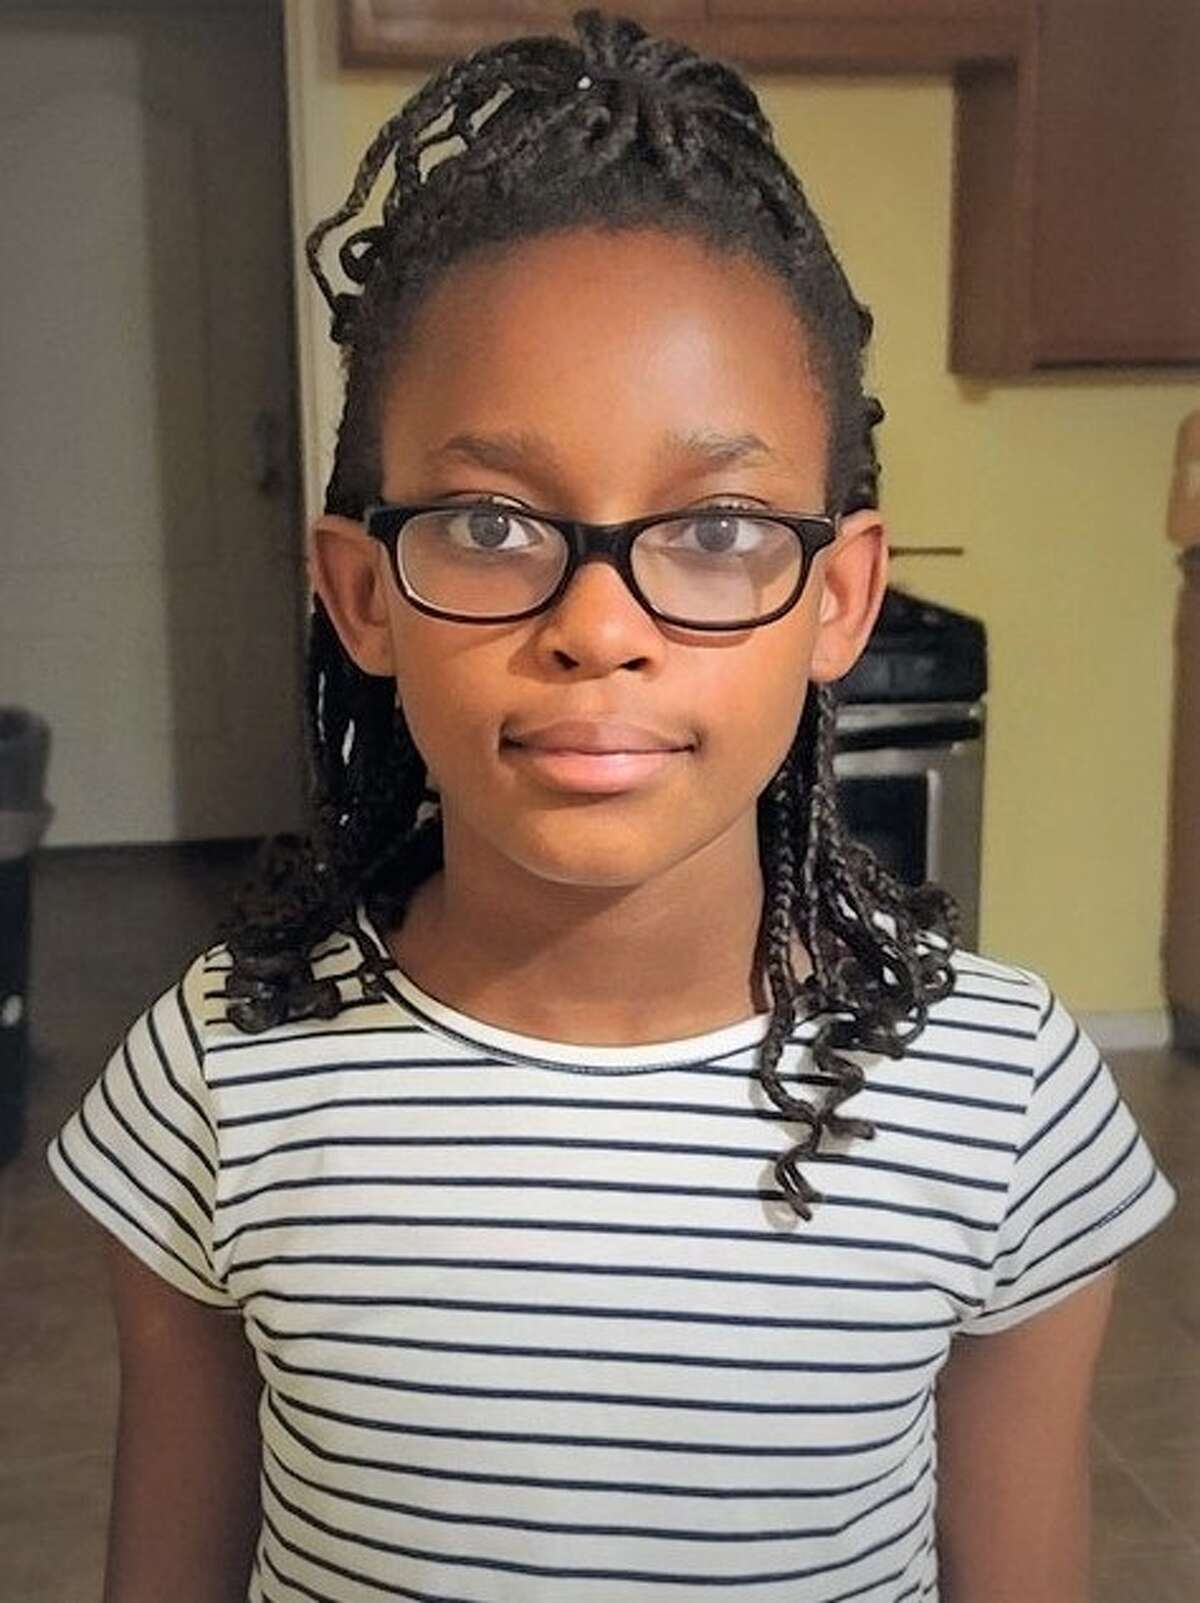 Lakisha is among the children listed on the Texas Adoption Resource Exchange (TARE) website.